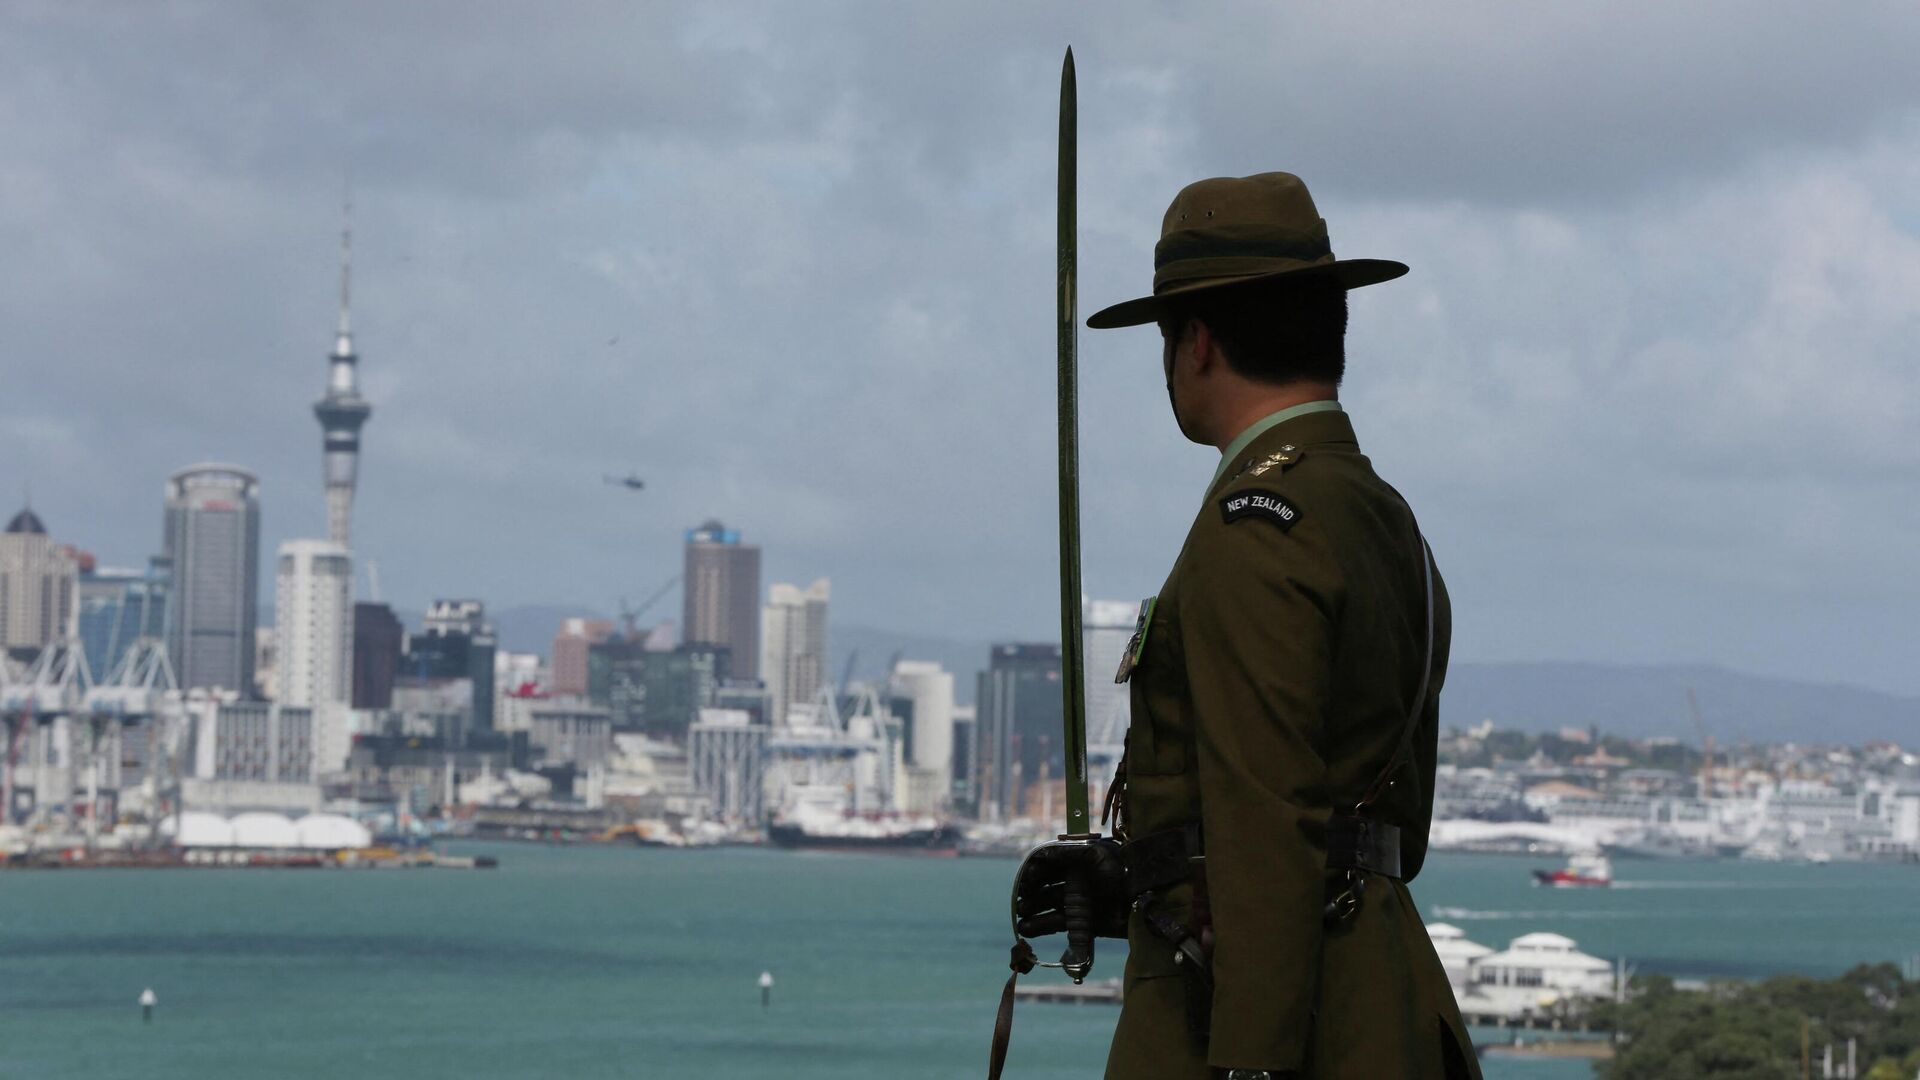 A member of the New Zealand Army looks on as navy ships arrive into the Waitemata Harbour as part of the fleet entry to celebrate the Royal New Zealand Navy's 75th anniversary in Auckland on November 16, 2016 - Sputnik International, 1920, 01.08.2022